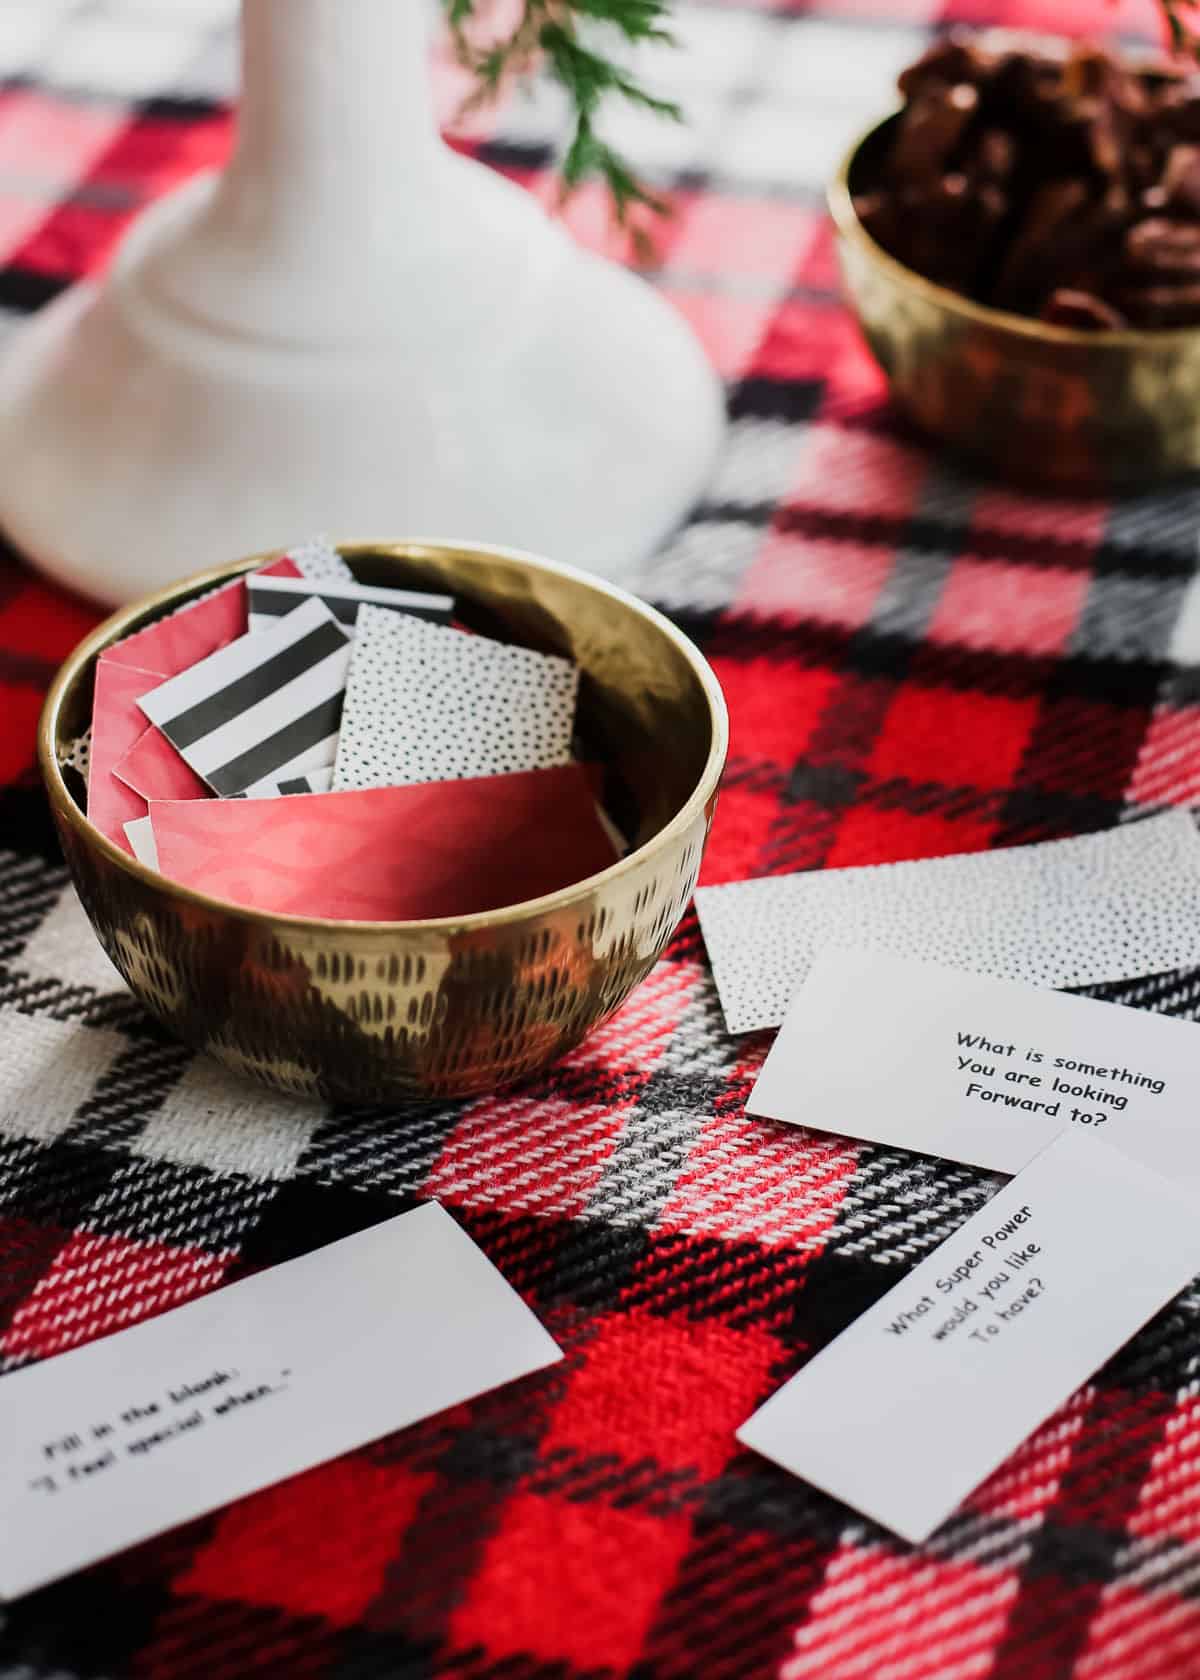 strips of paper with conversation questions printed on them, sitting on red plaid tablecloth.